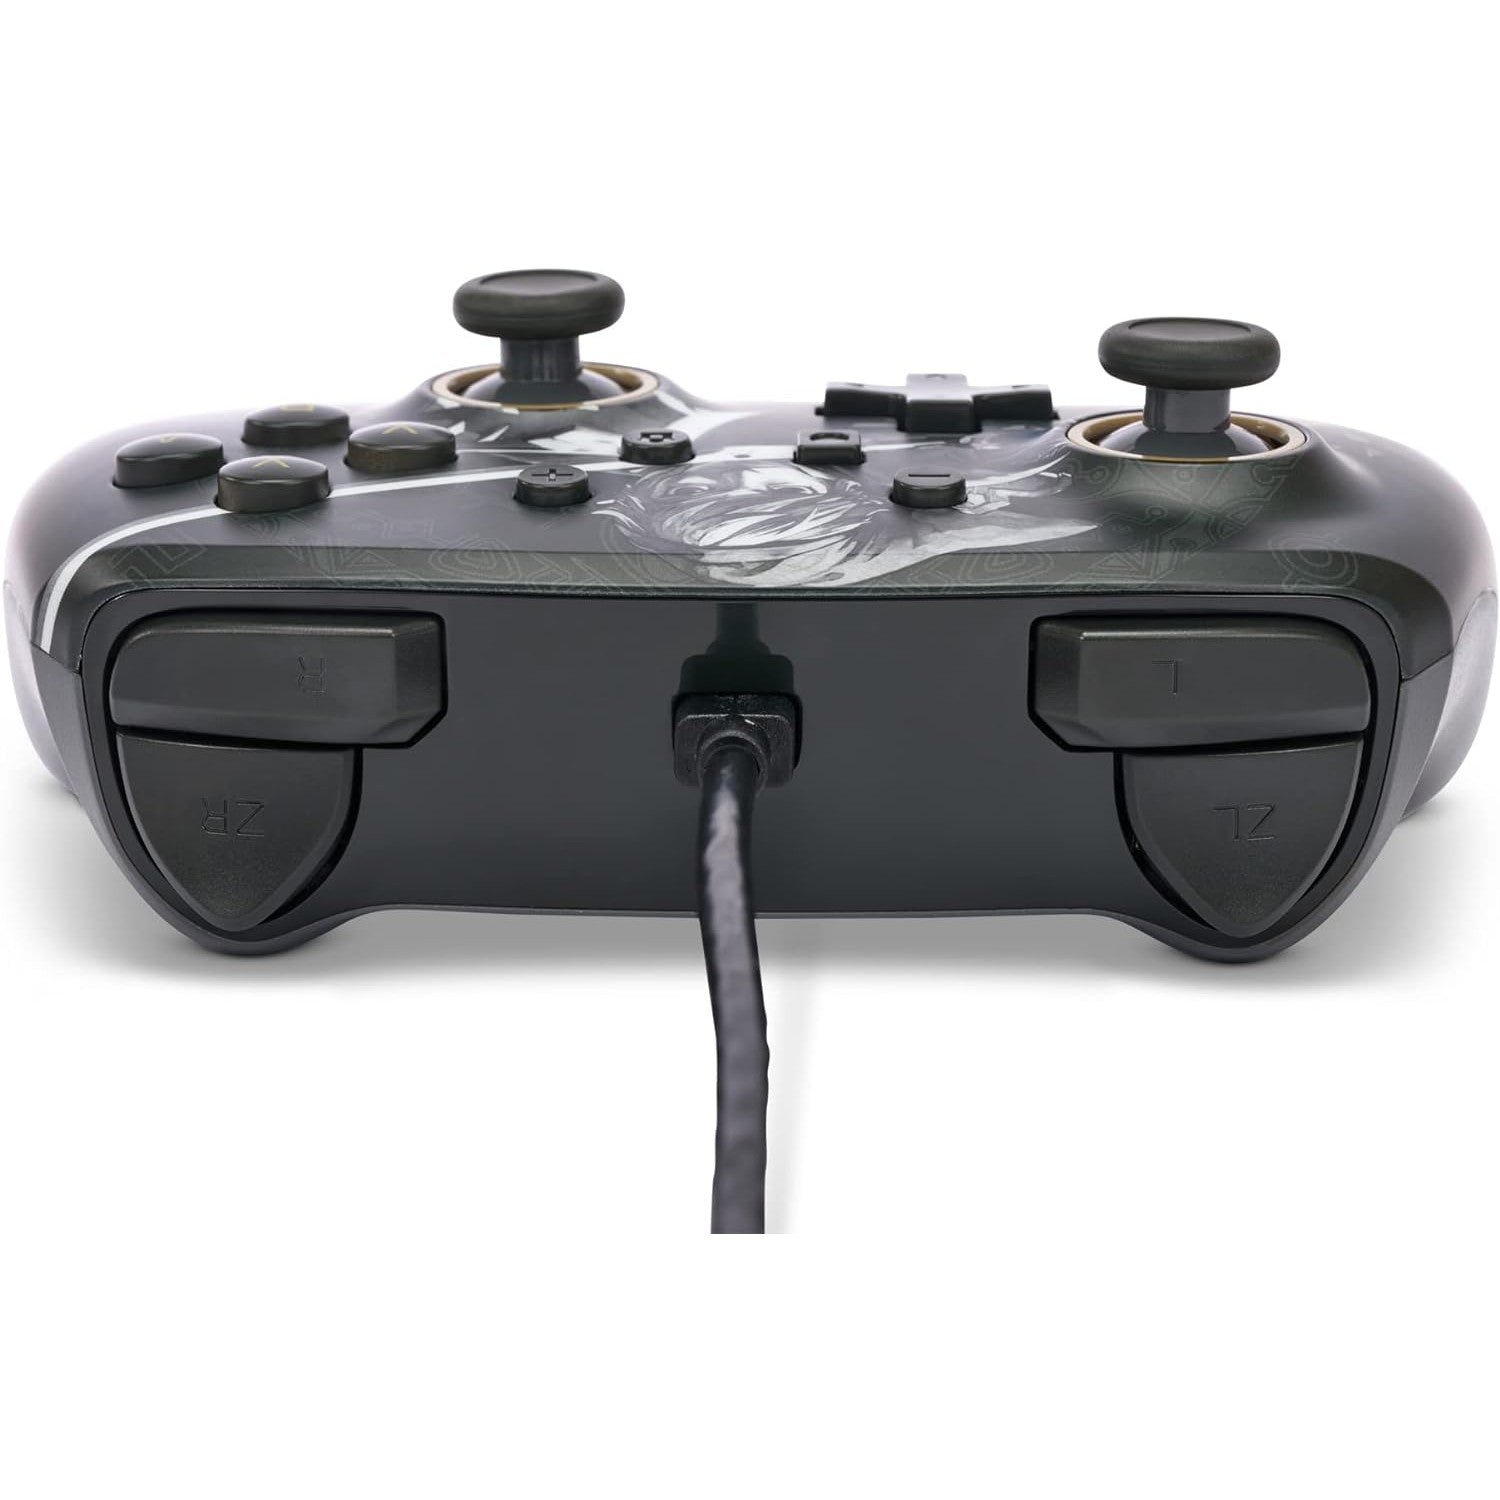 PowerA Enhanced Wired Controller for Nintendo Switch - Battle Link